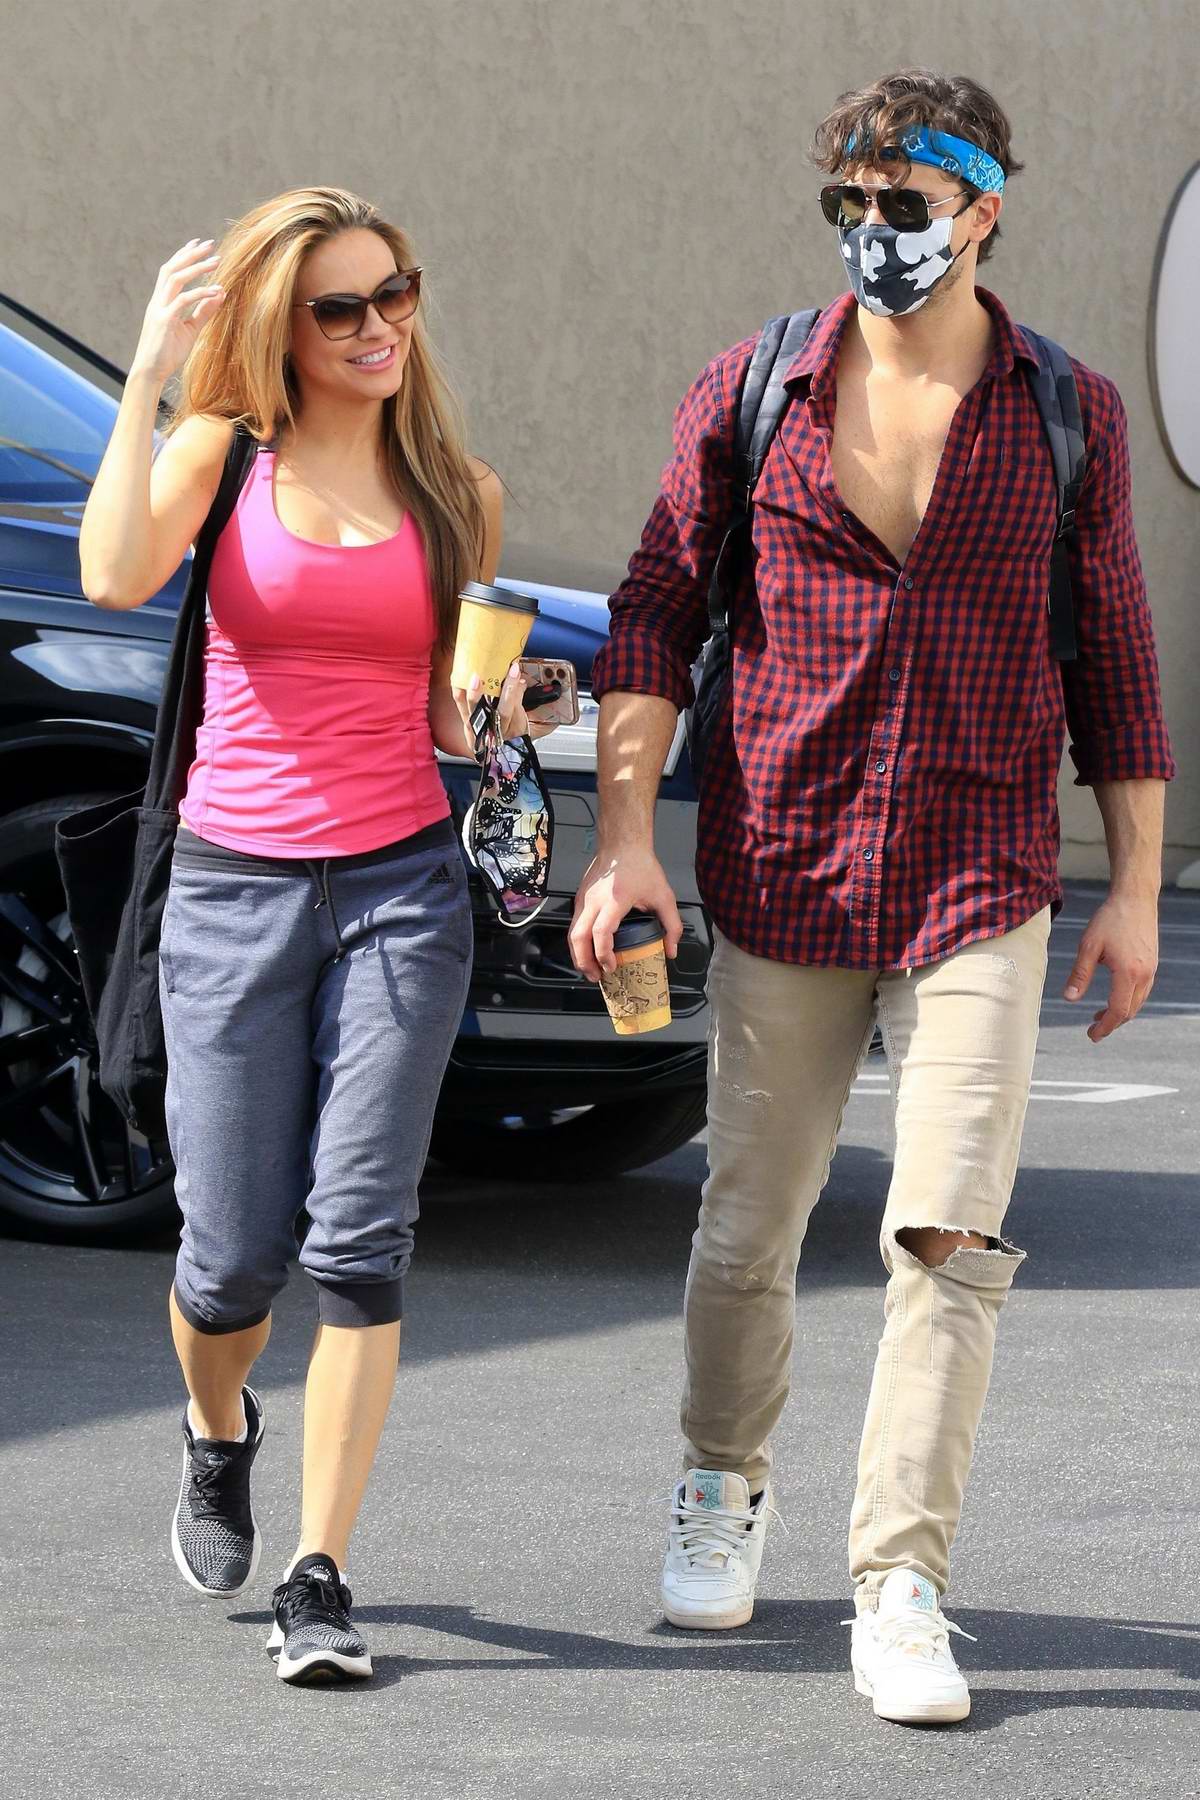 Chrishell Stause wears a hot pink tank top as she arrives at the DWTS  studio in